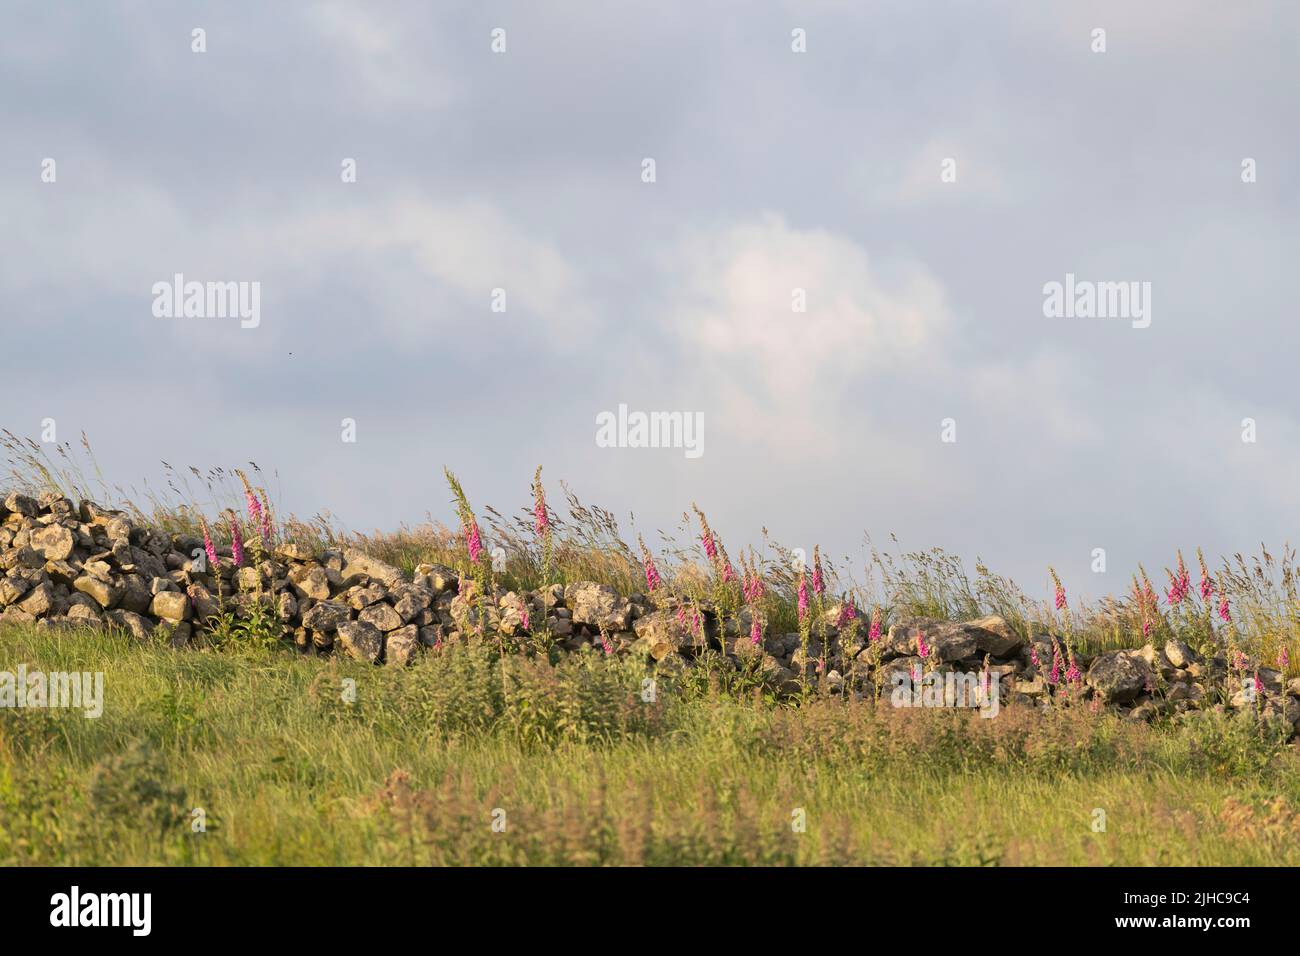 Foxgloves (Digitalis Purpurea) and a Variety of Grasses and Wildflowers Growing by a Drystone Wall at the Field Margin in Evening Sunshine Stock Photo